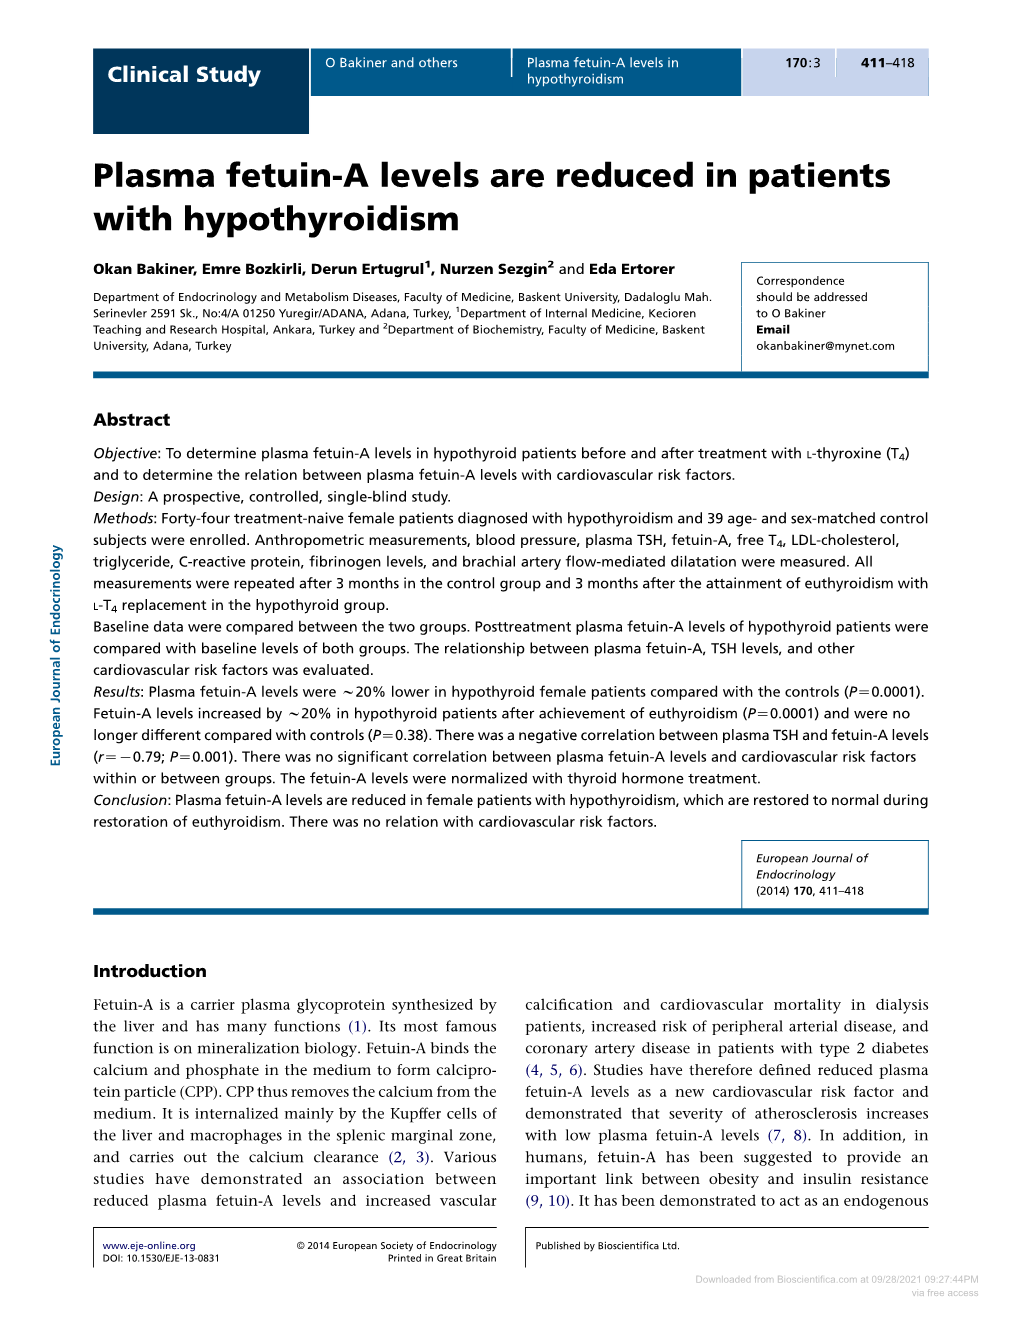 Plasma Fetuin-A Levels Are Reduced in Patients with Hypothyroidism